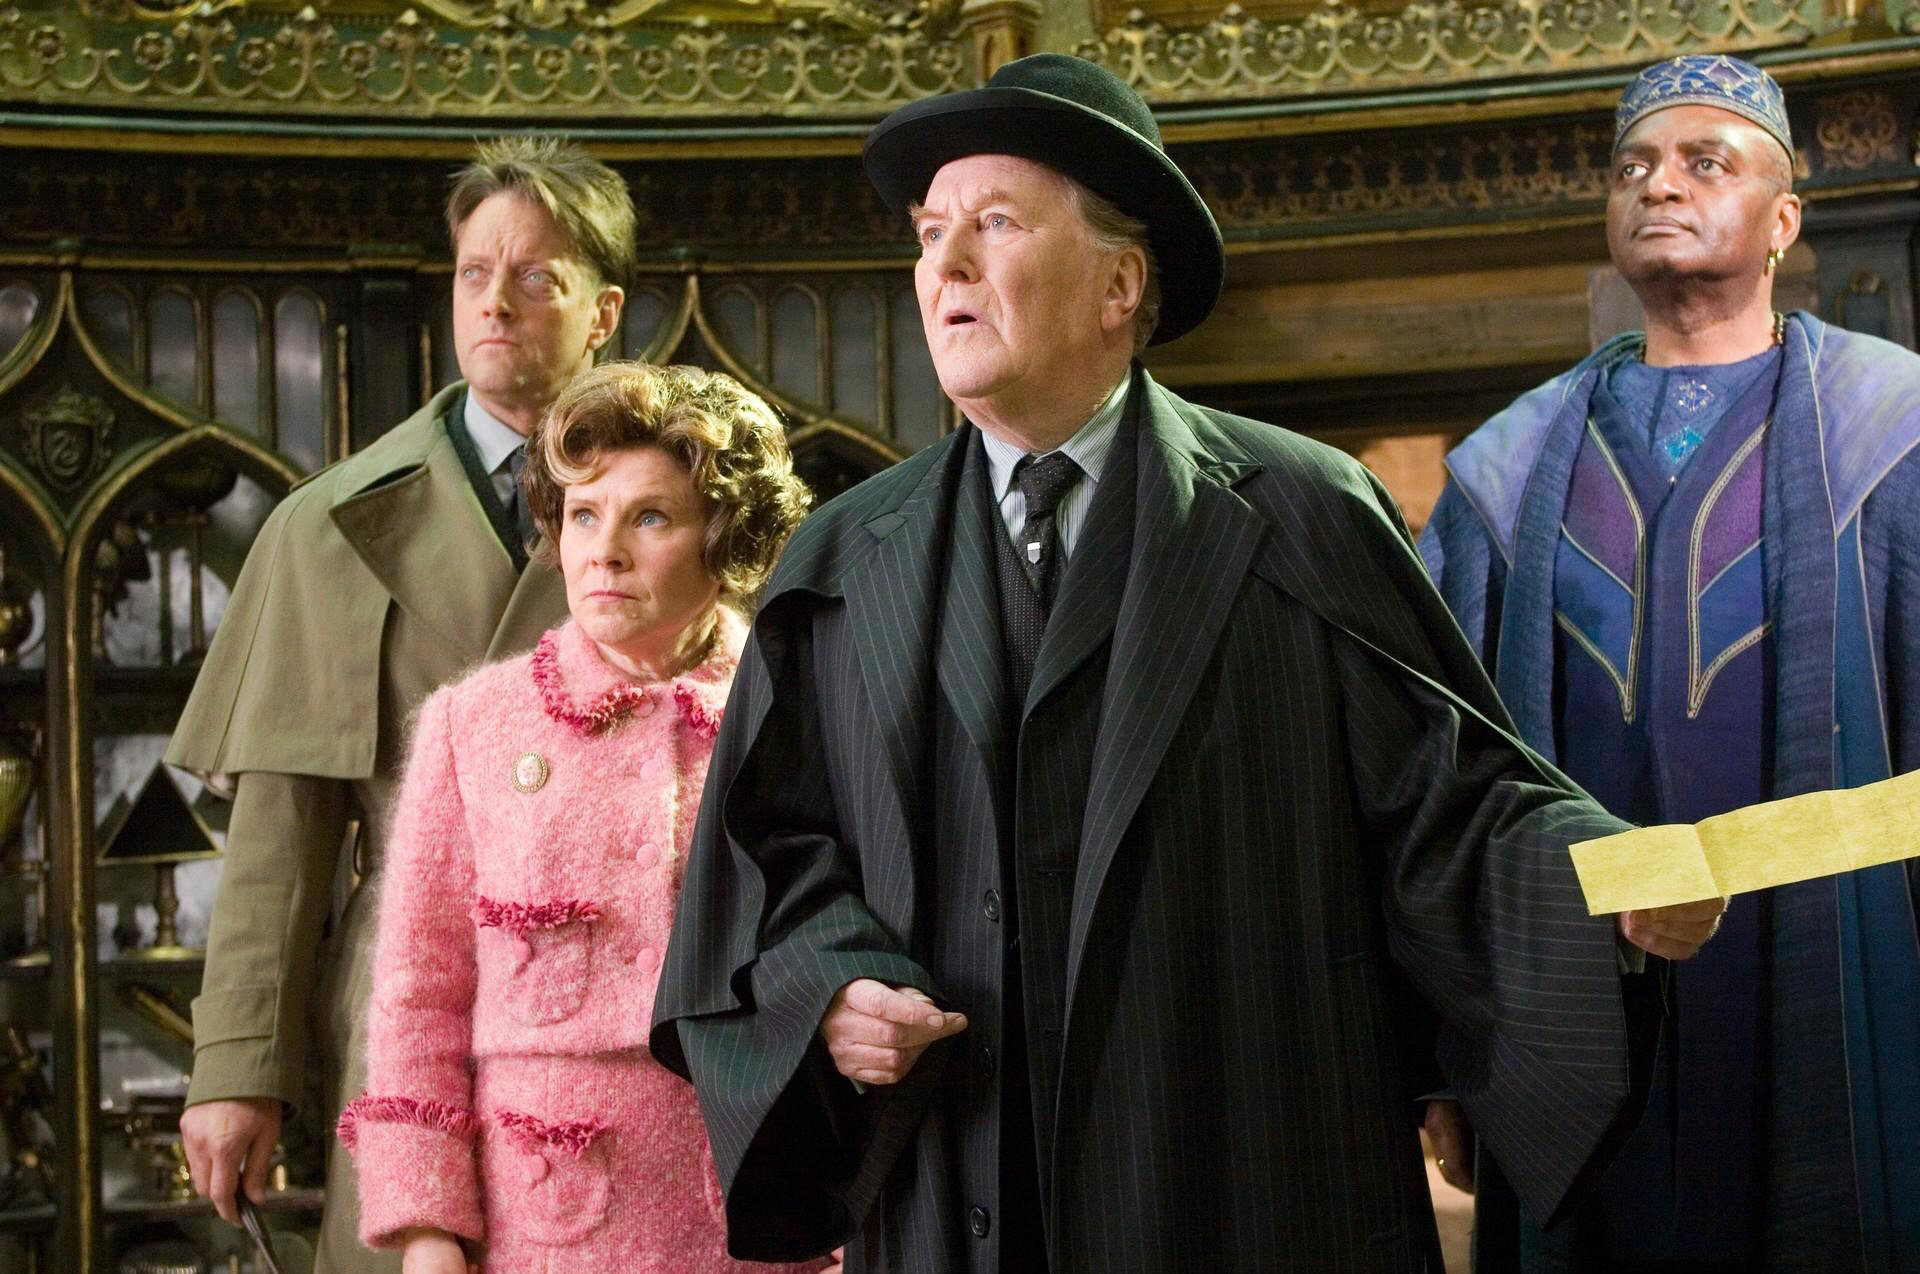 Who Played Cornelius Fudge In The Harry Potter Franchise?